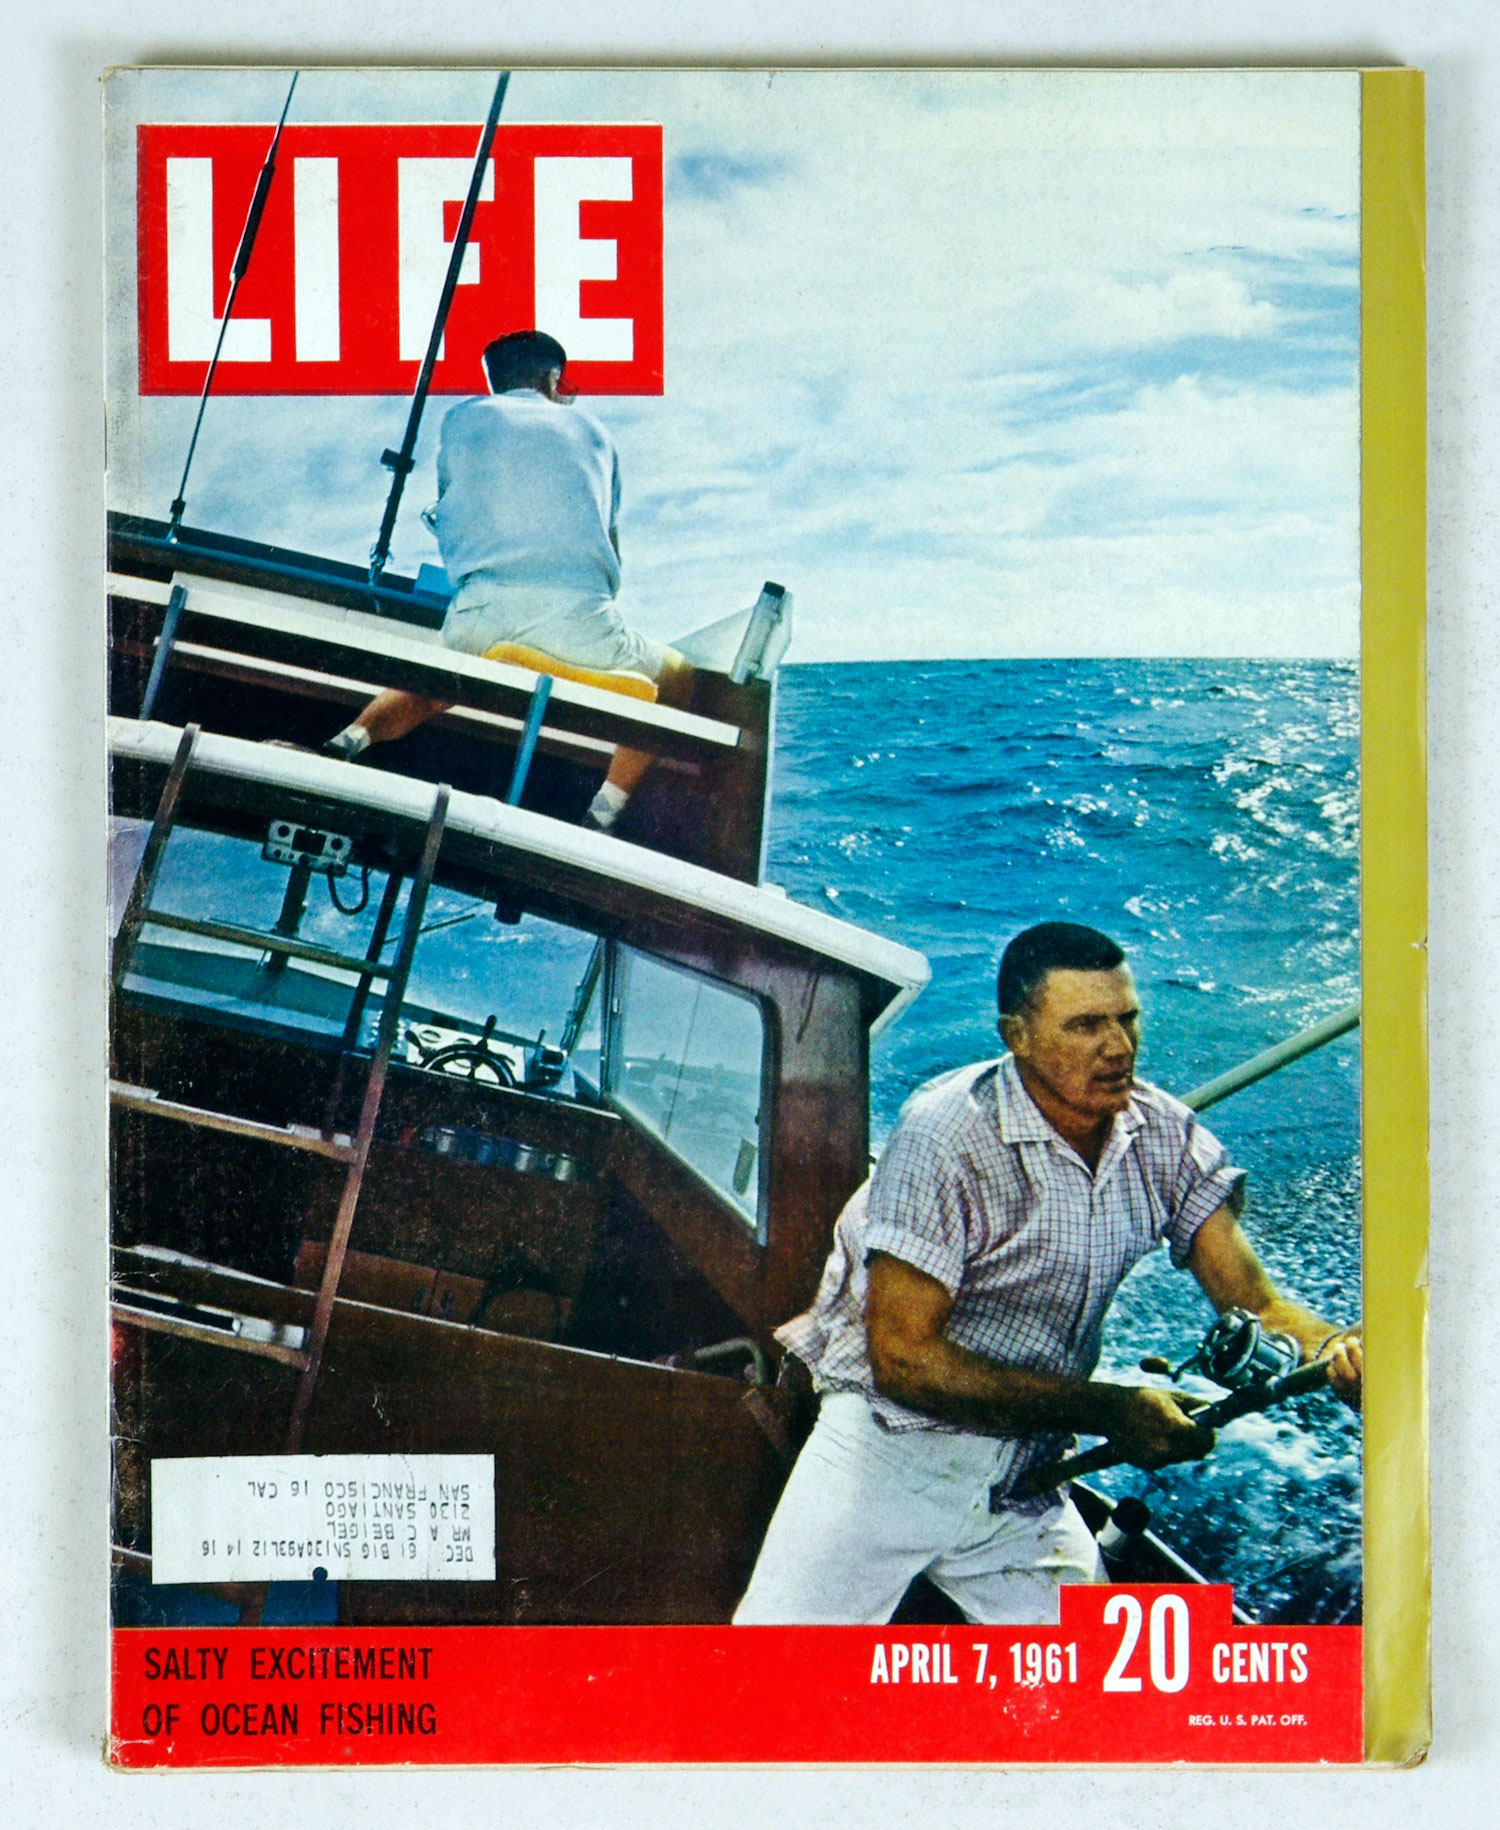 LIFE Magazine Back Issue 1961 April 7 Salty Excitement of Ocean Fishing